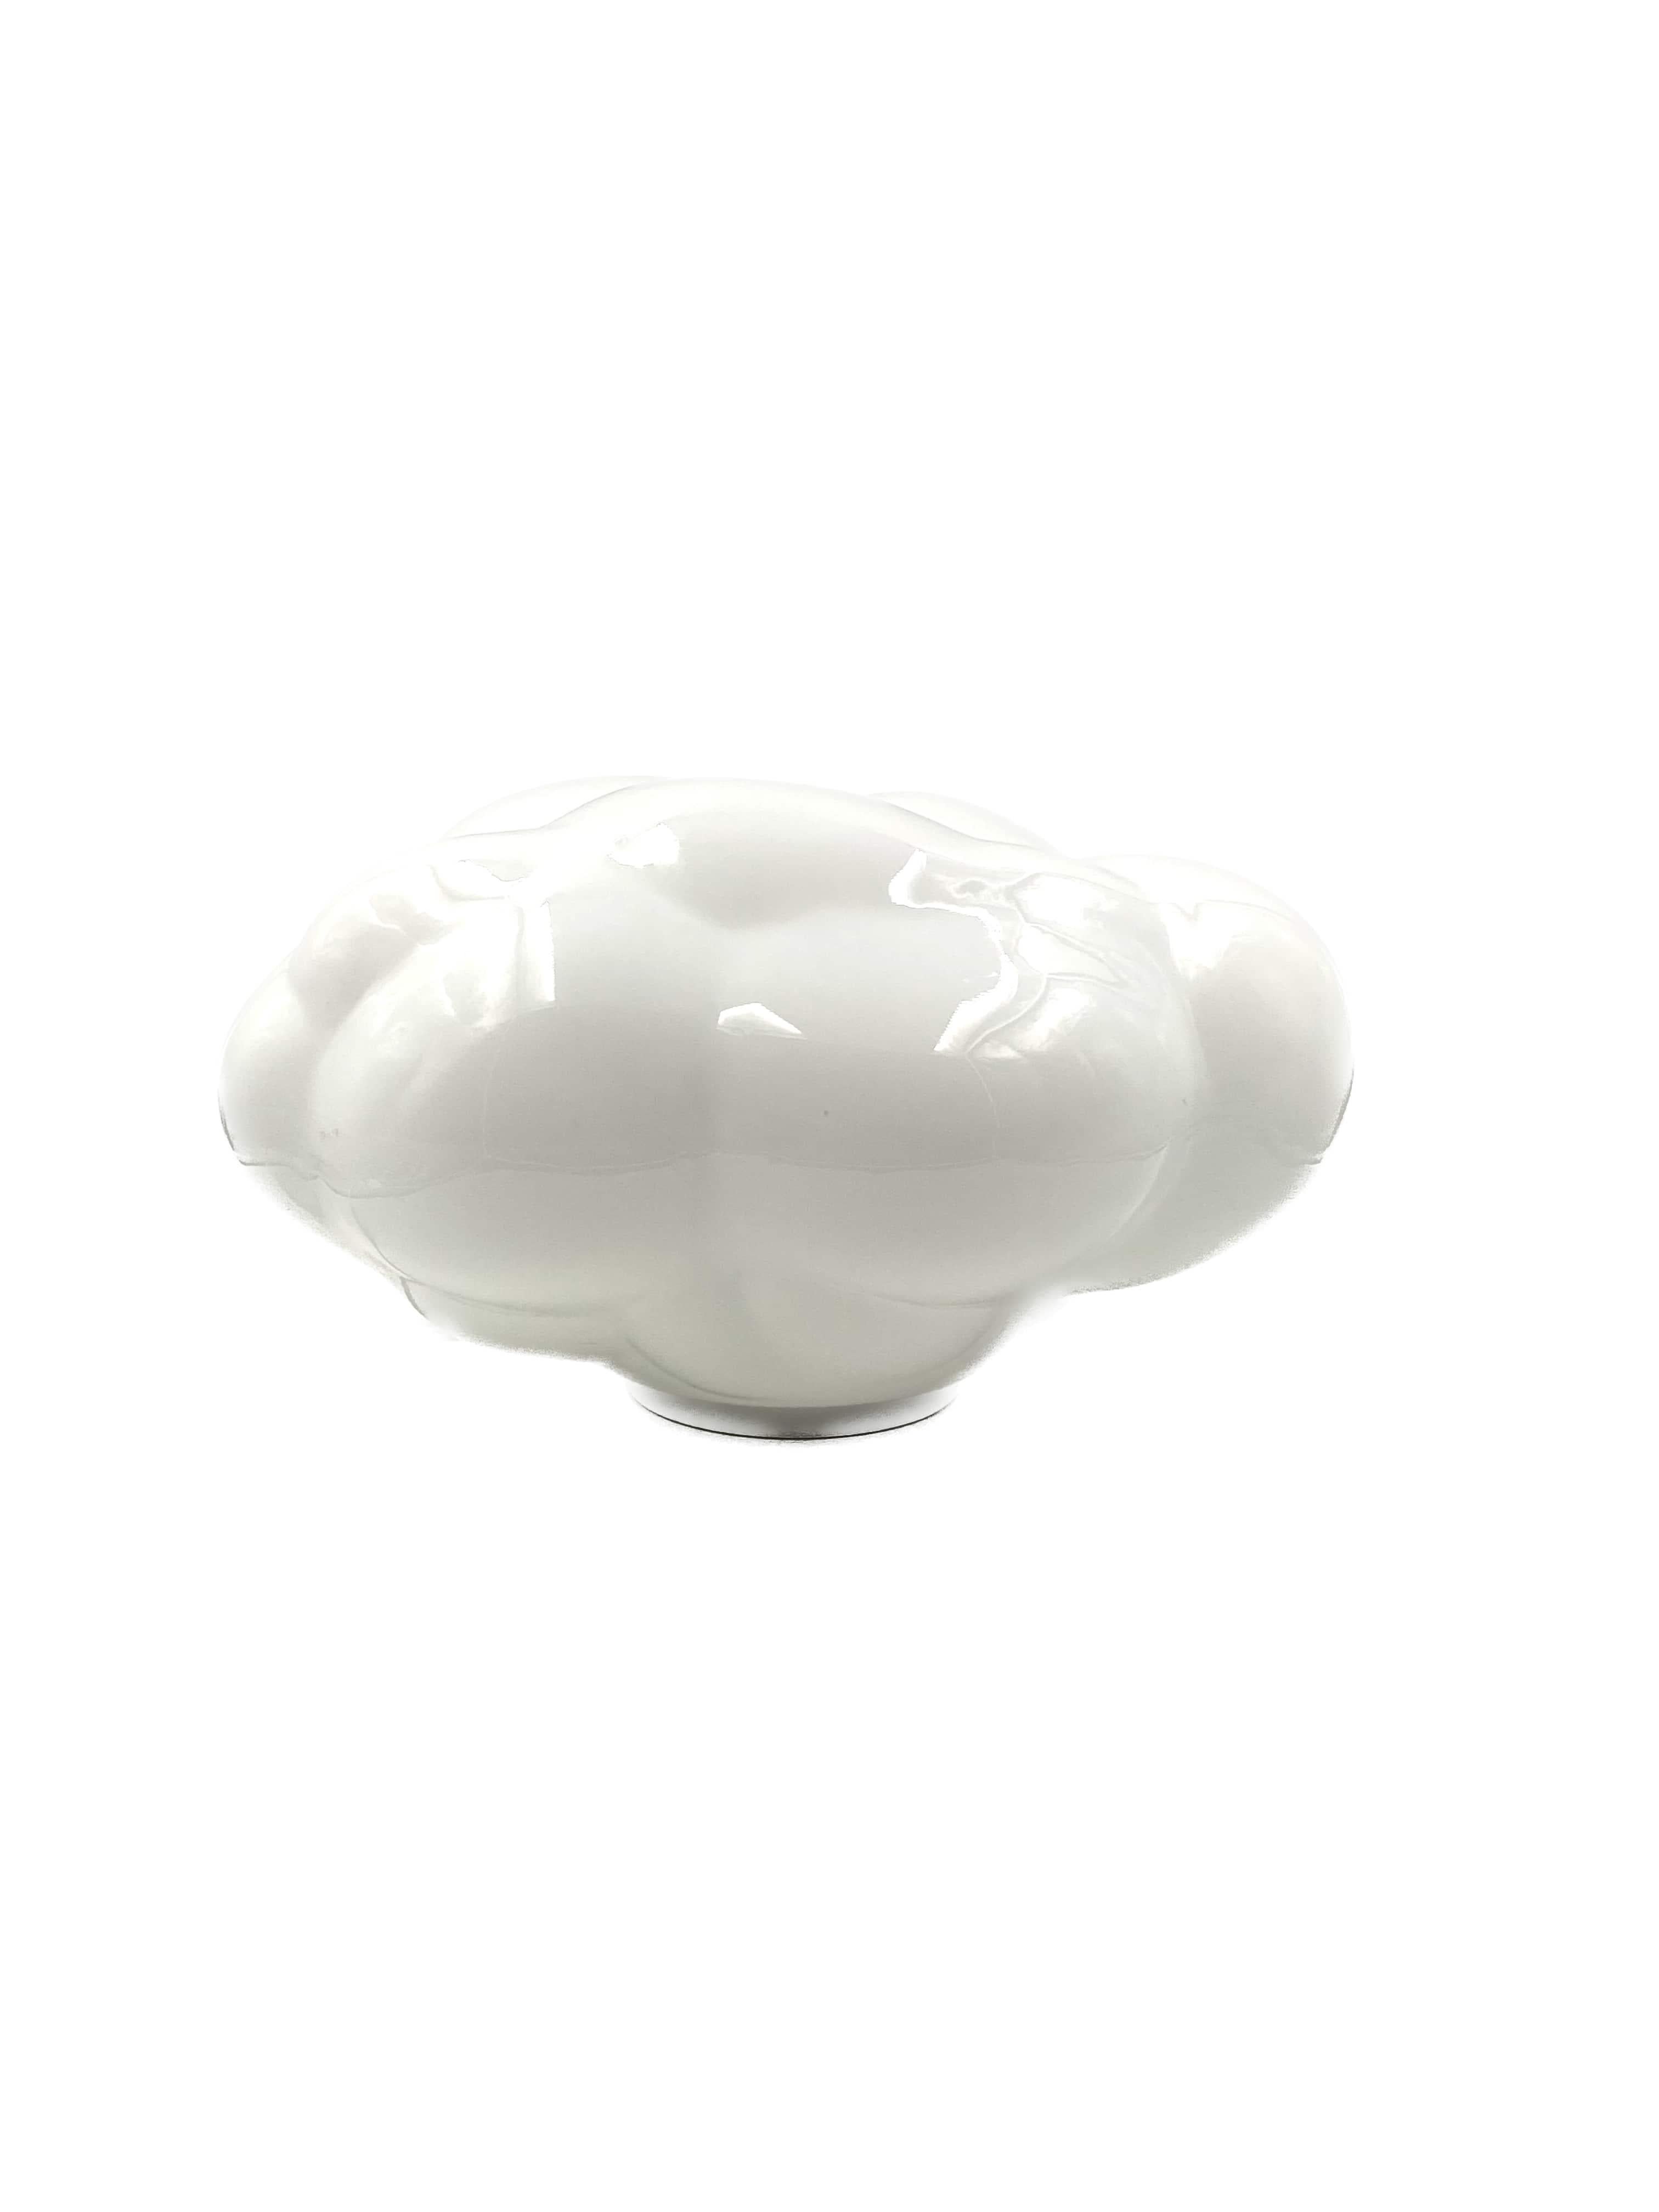 Milk Glass Carlo Cattaneo, Cloud Nuvola Glass Table Lamp, Cattaneo, 2000s